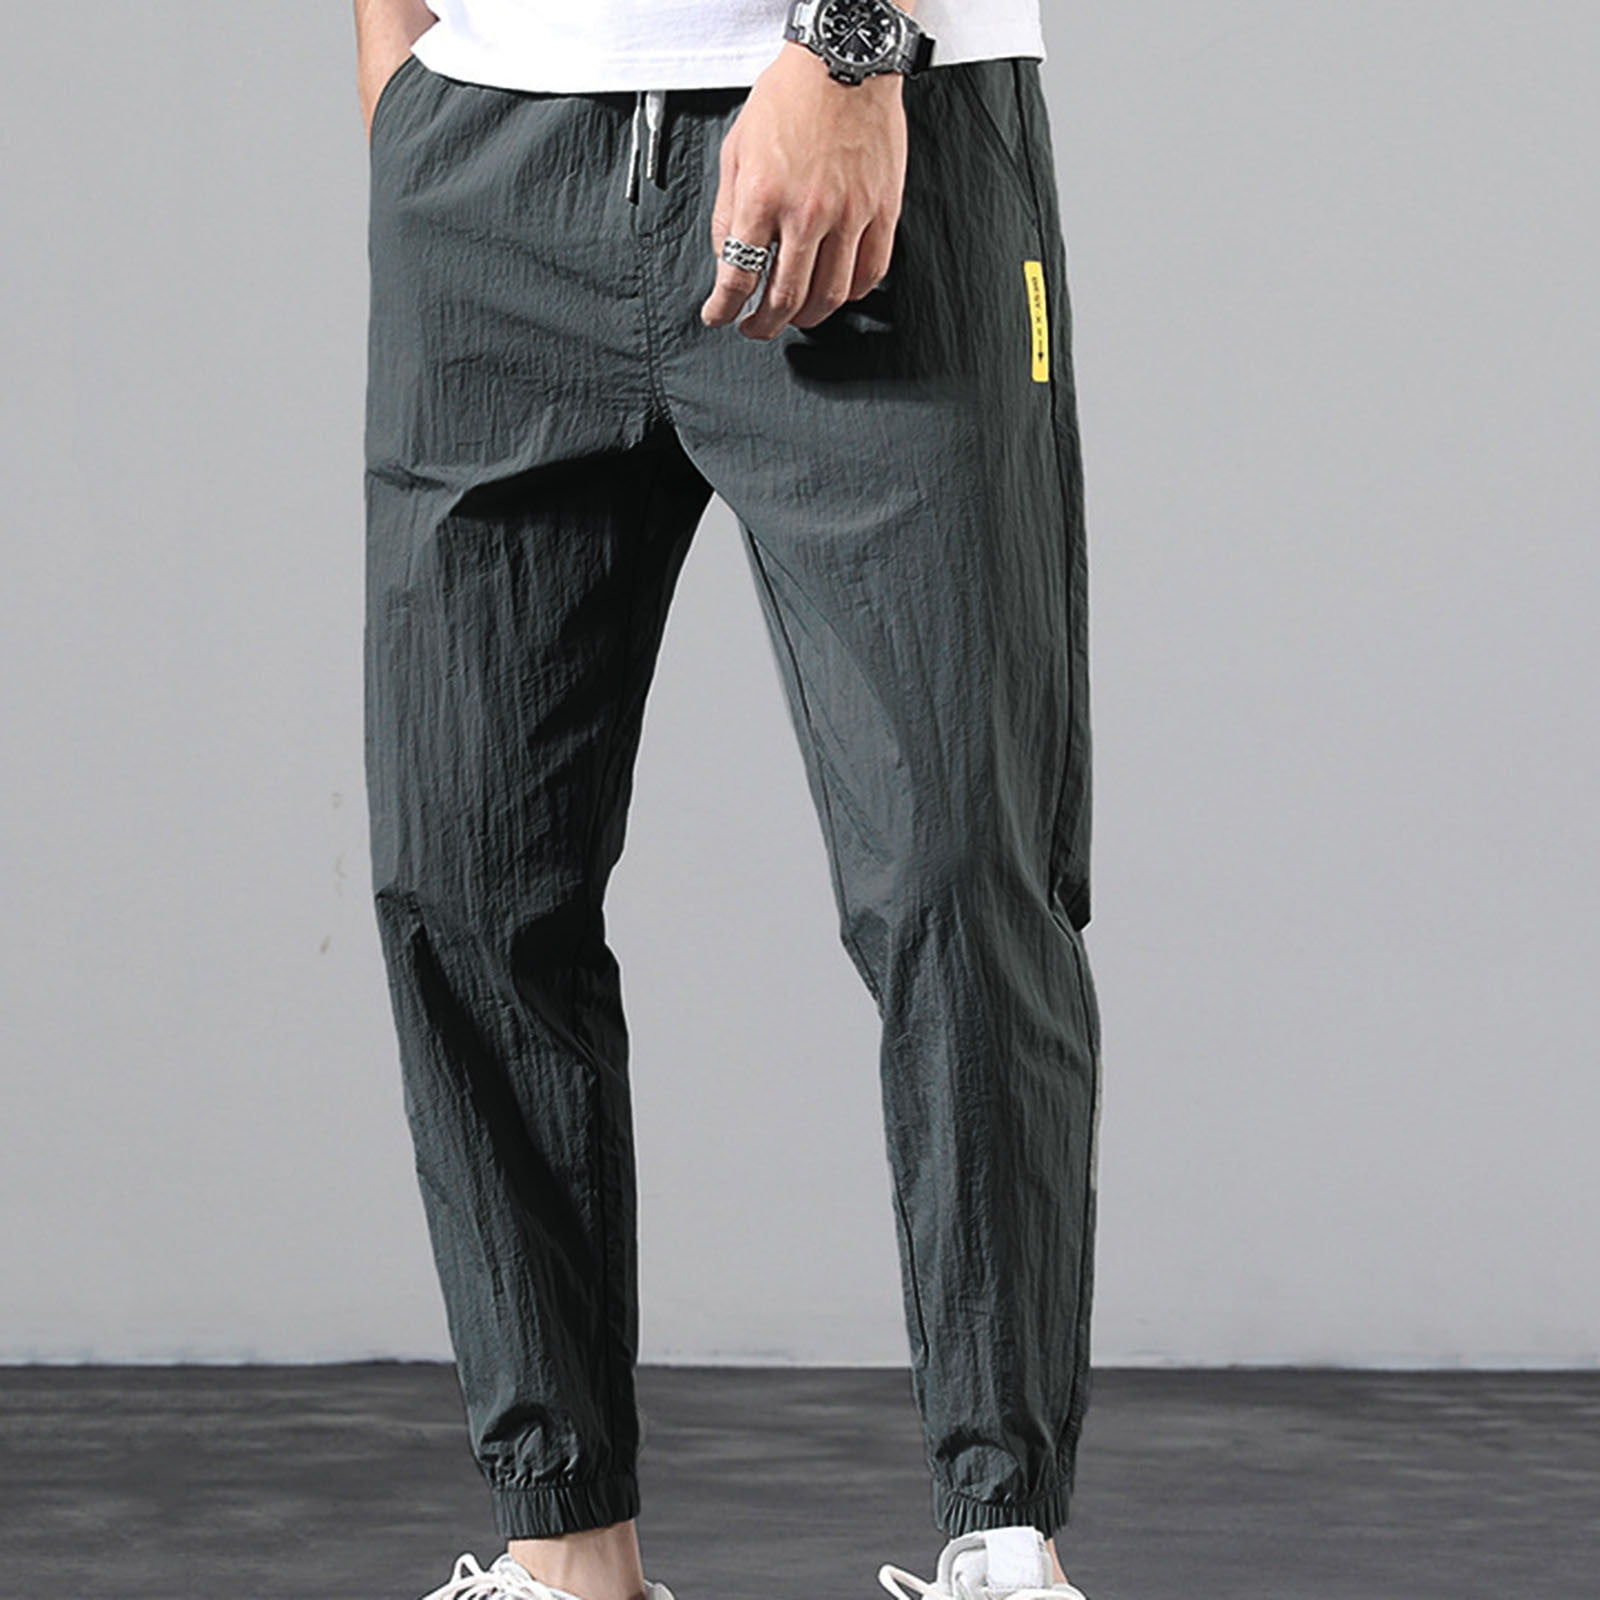 Indiana Jones Pants Trousers Clothing Mens Clothing Trousers 